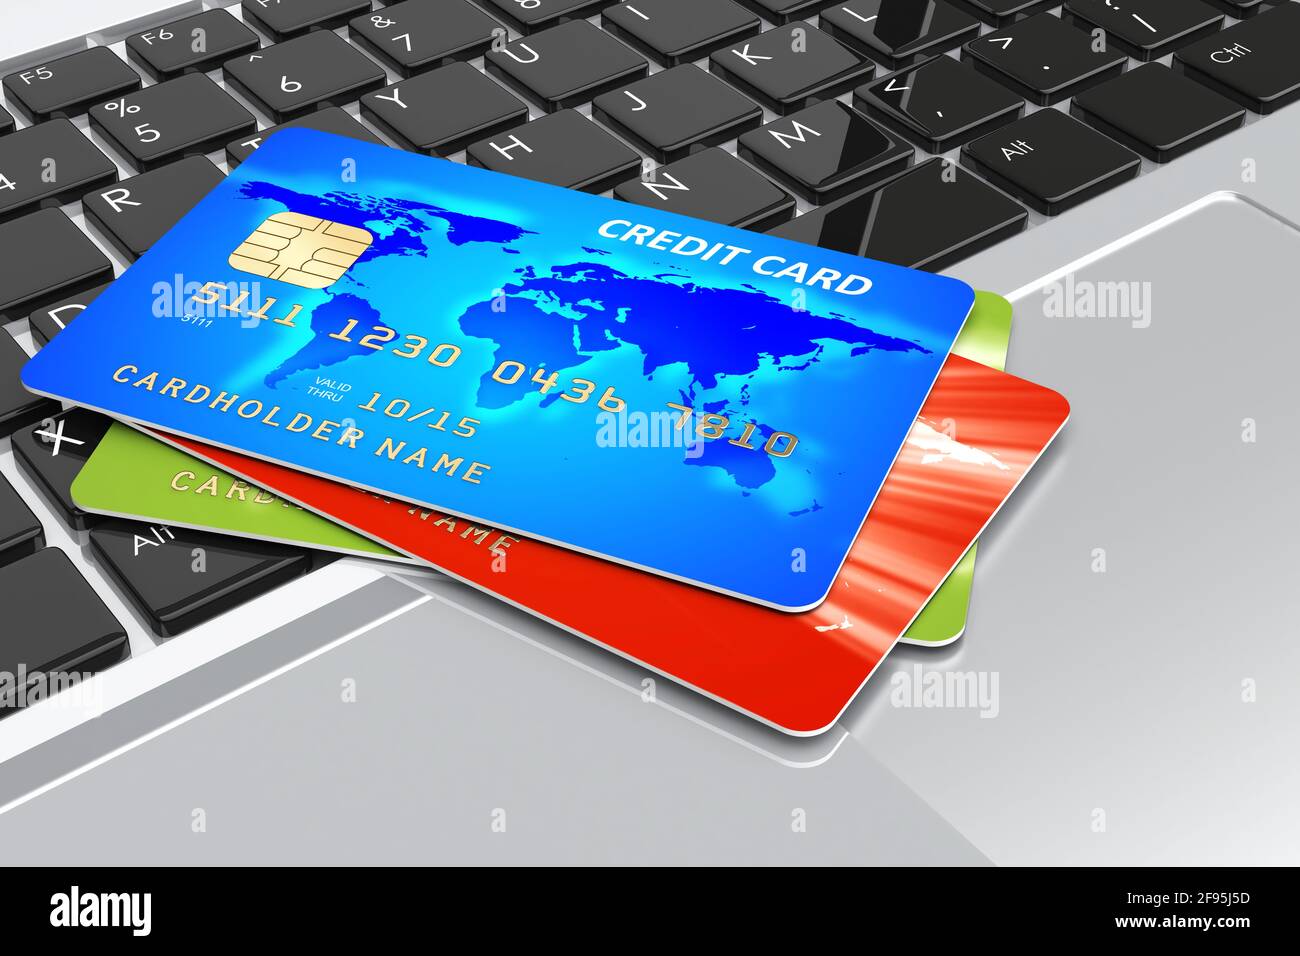 Credit cards on laptop keyboard. Internet shopping and e-commerce concept Stock Photo